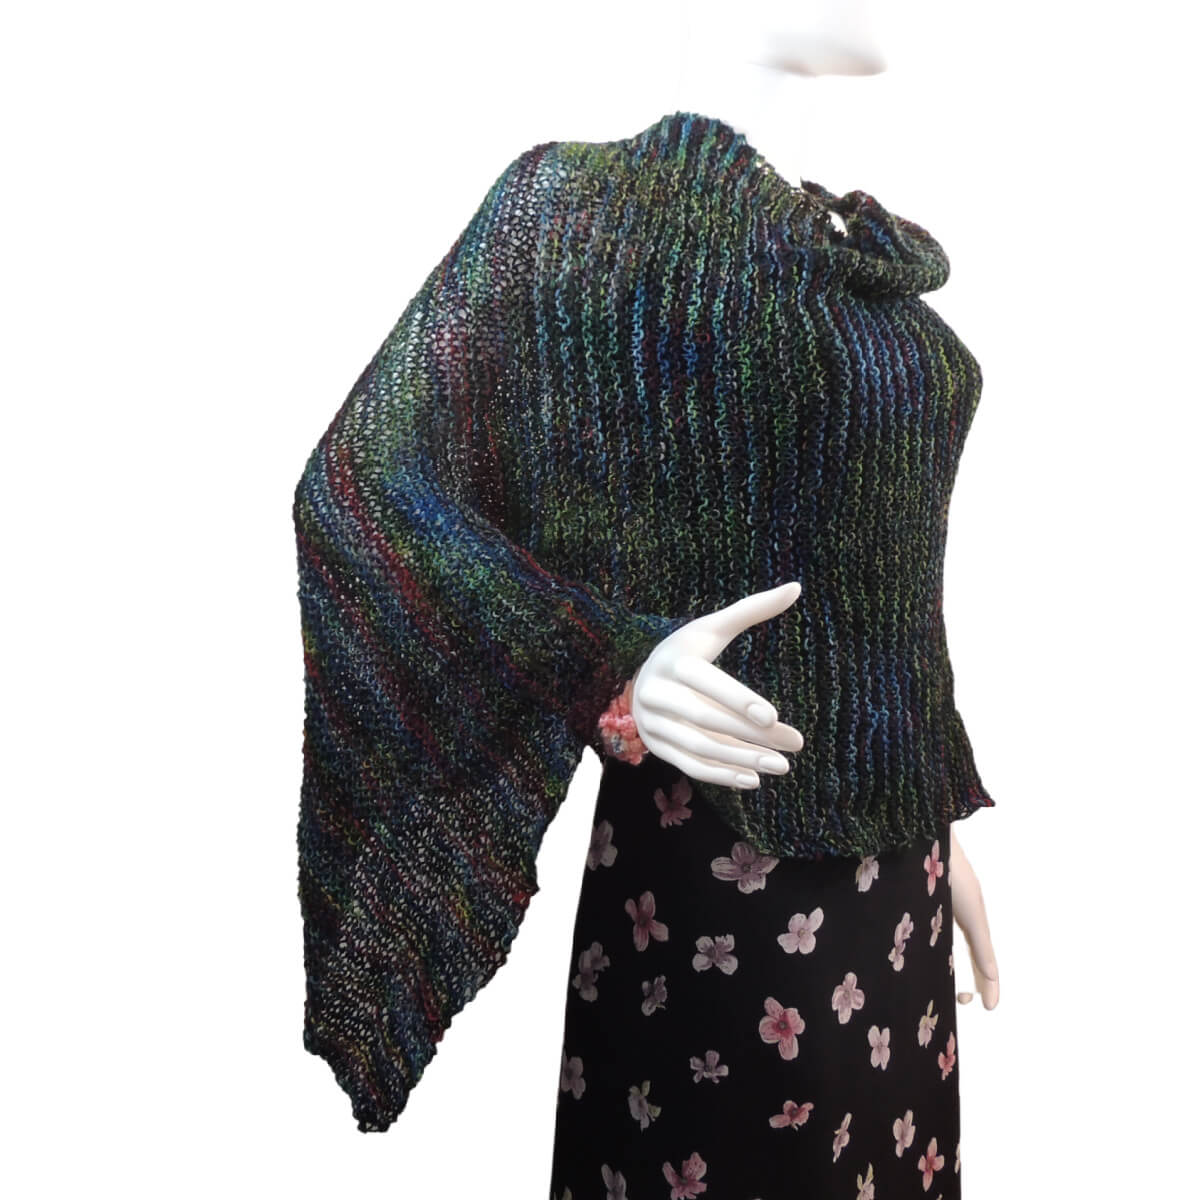 White mannequin wearing a black tank and skirt and a knit poncho in black with bits of dark red, blue, and green. The poncho is waist length and straight across the front with a point hanging off one arm.